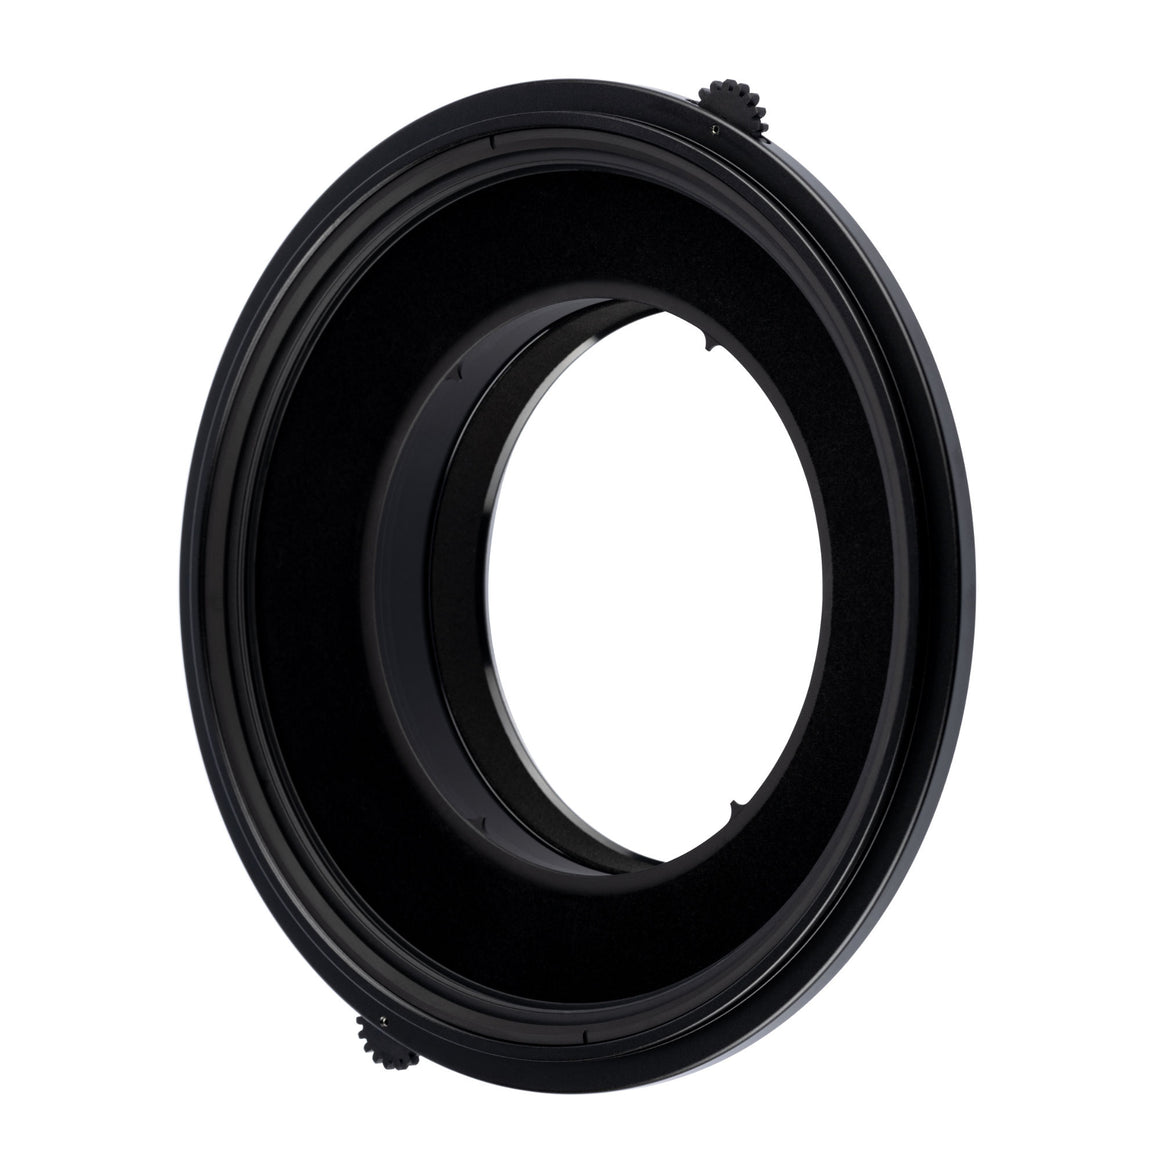 nisi-s6-150mm-filter-holder-adapter-ring-for-sony-fe-12-24mm-f-2-8-gm